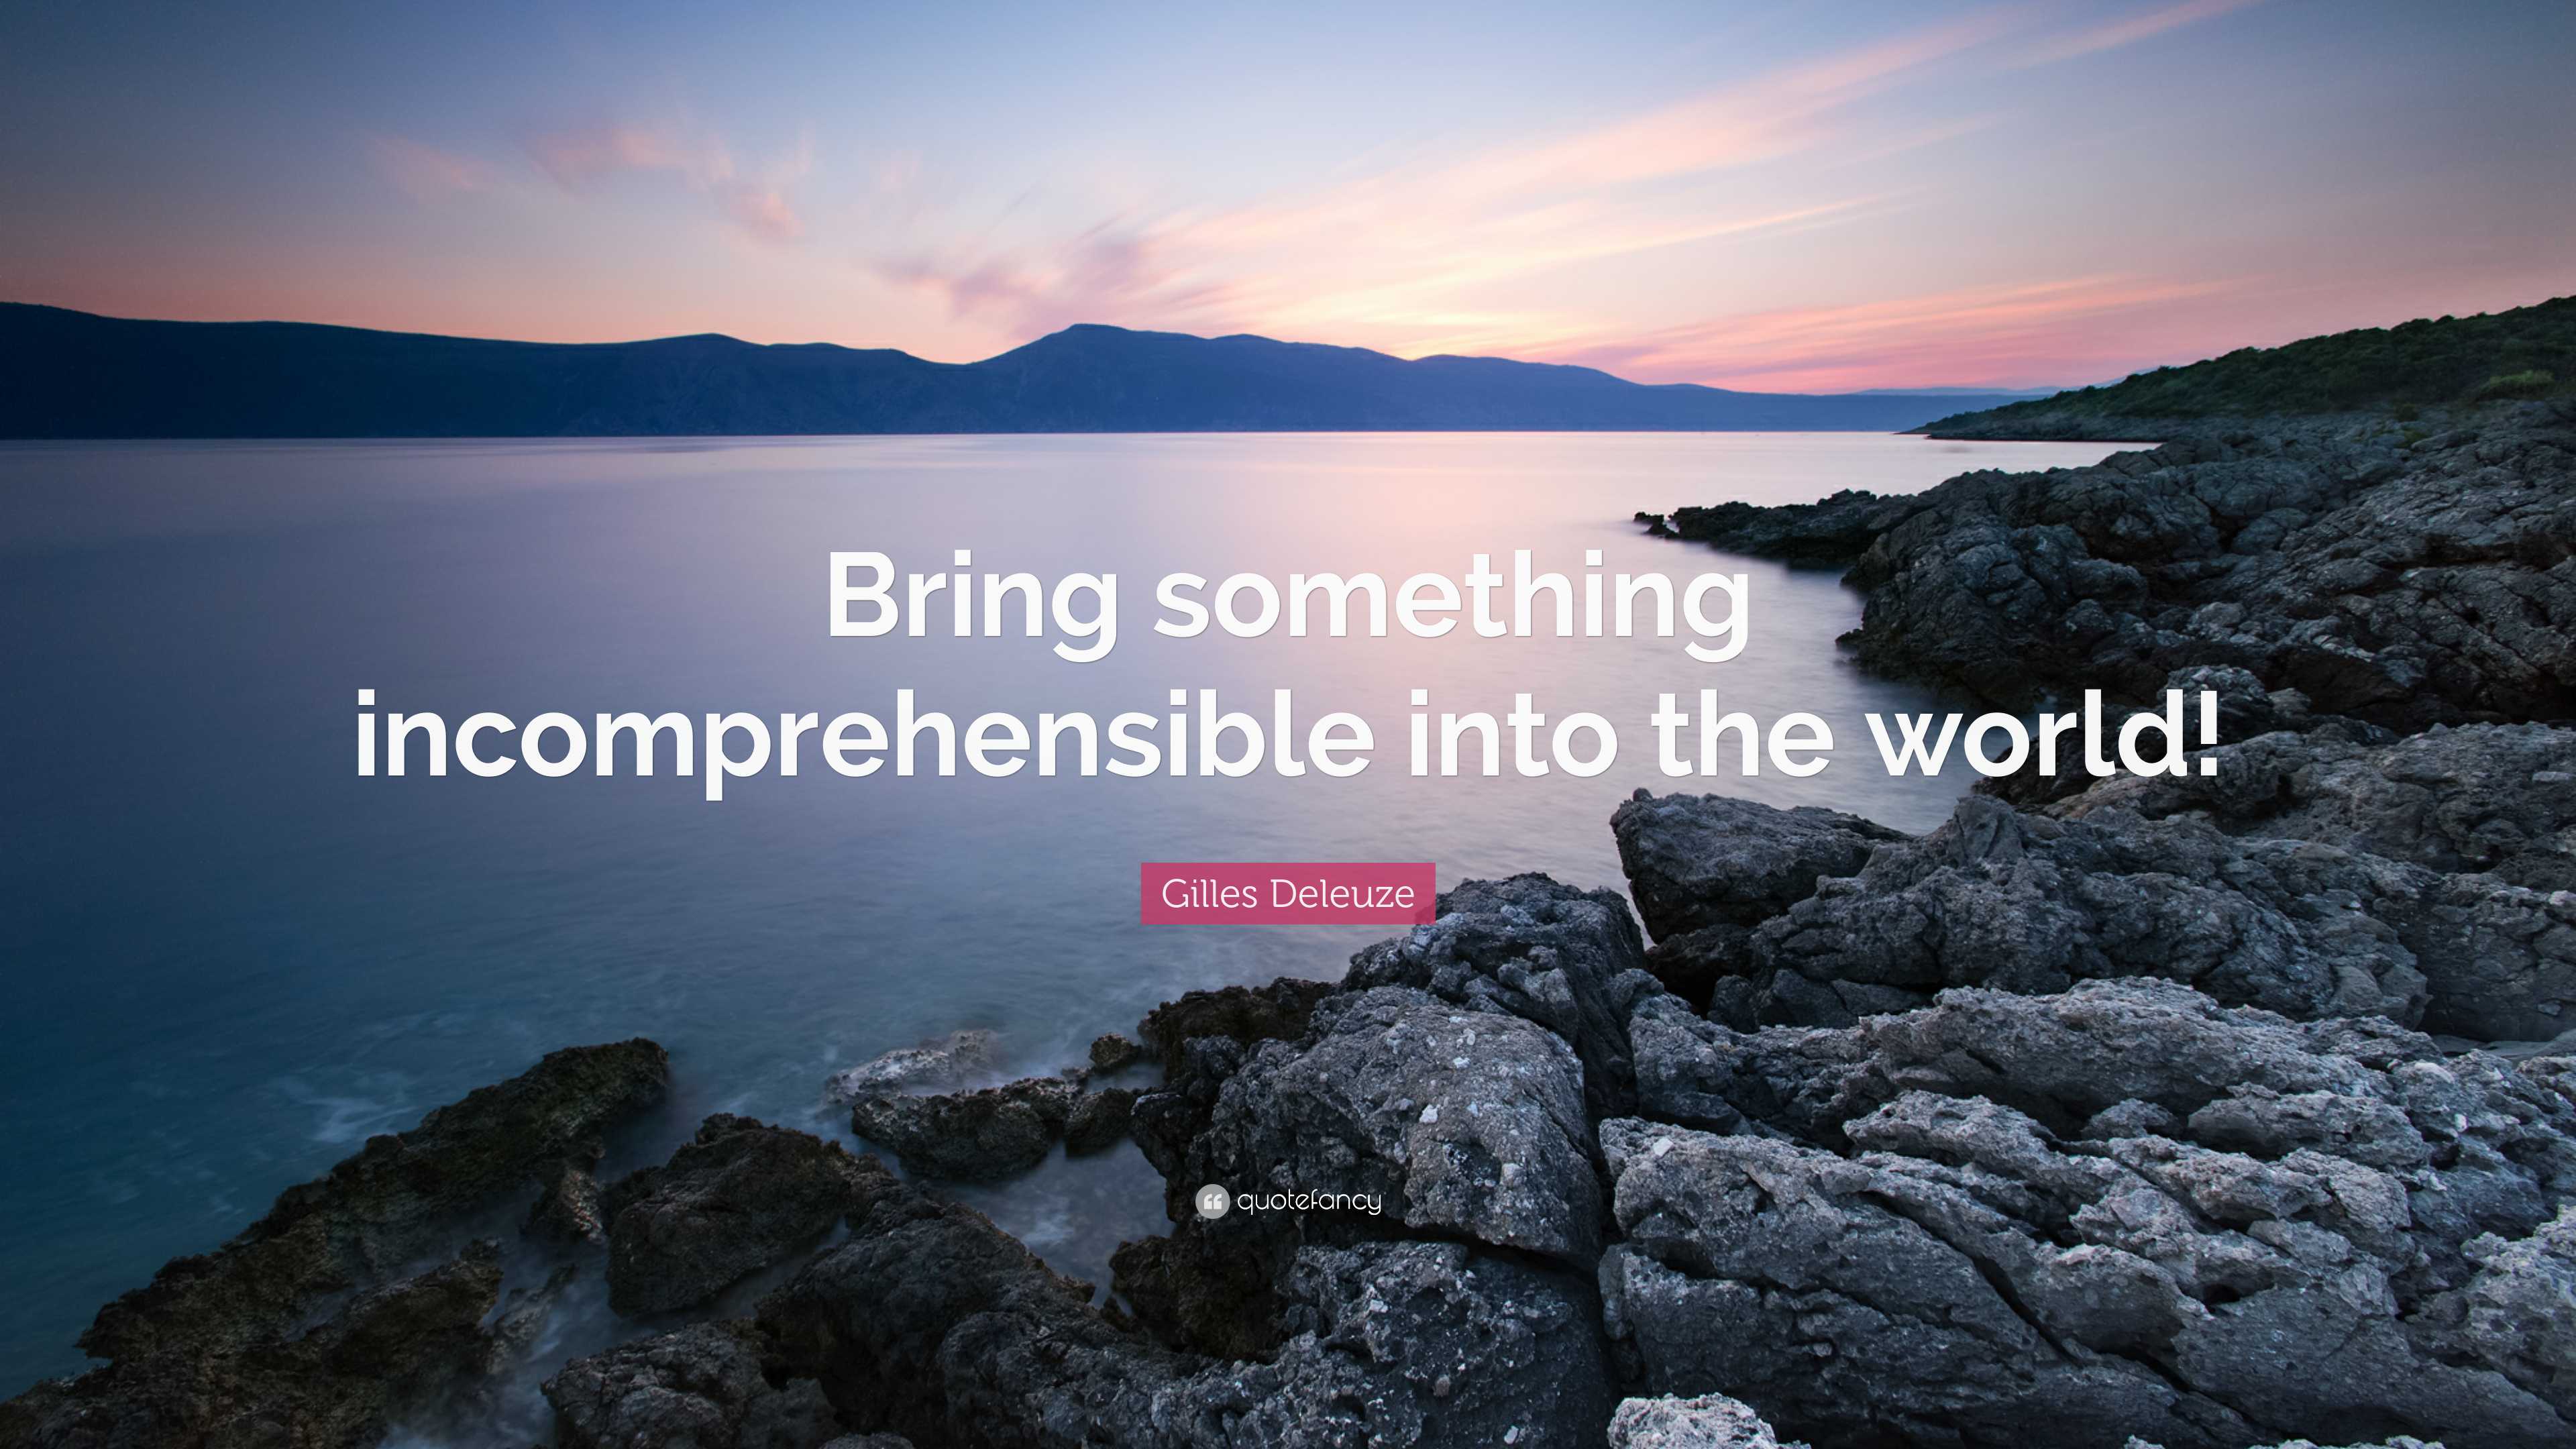 Gilles Deleuze Quote: “Bring something incomprehensible into the world!”